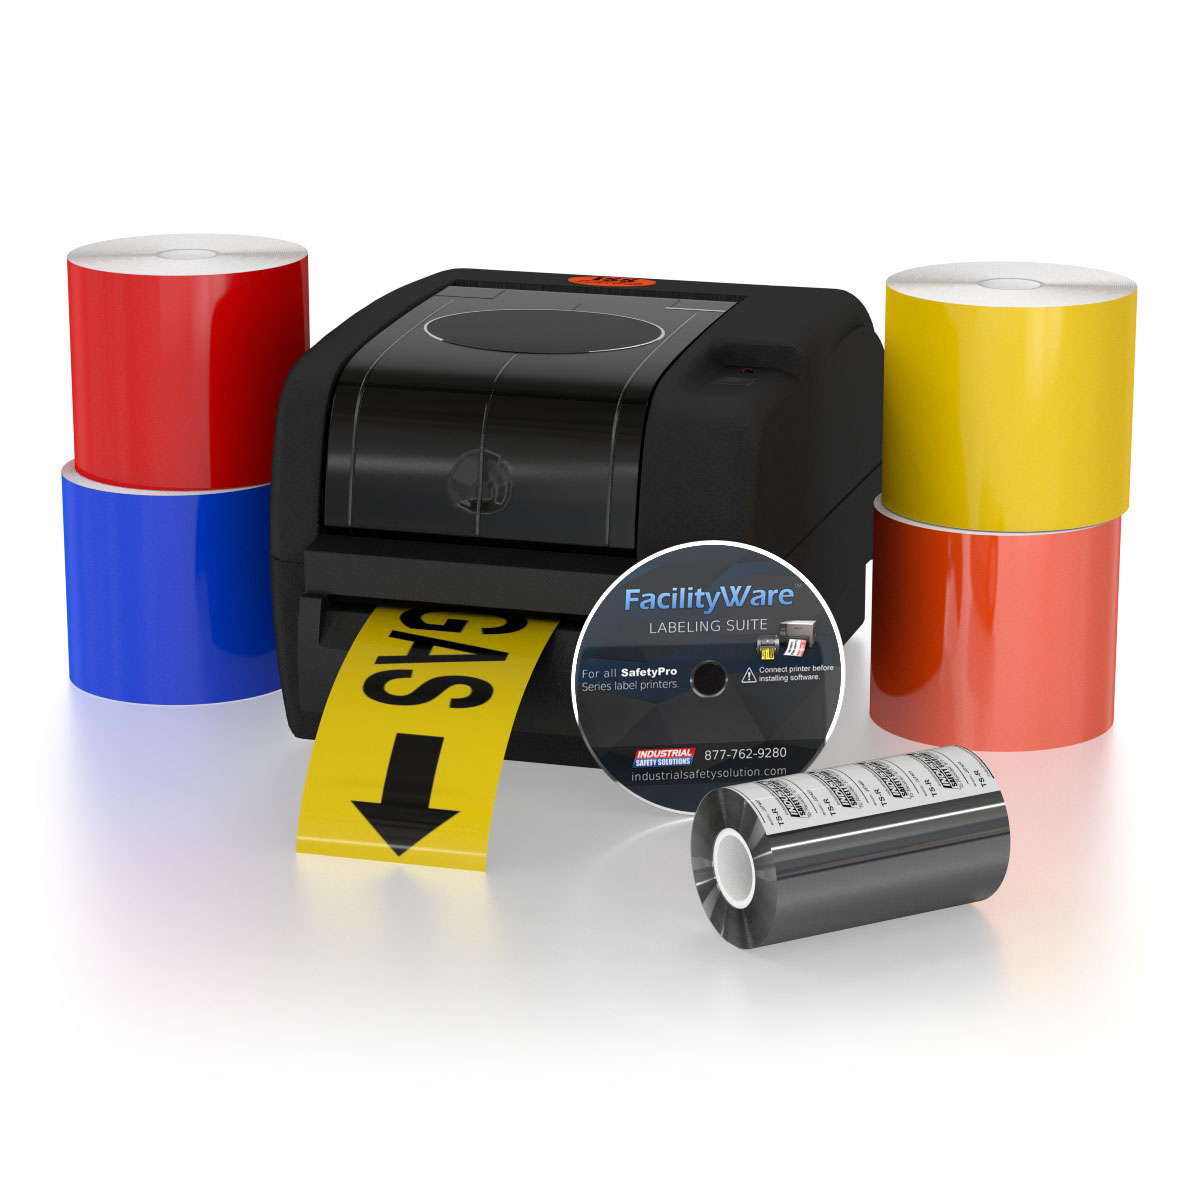 Detail view for SafetyPro Industrial Label Printer with Supplies